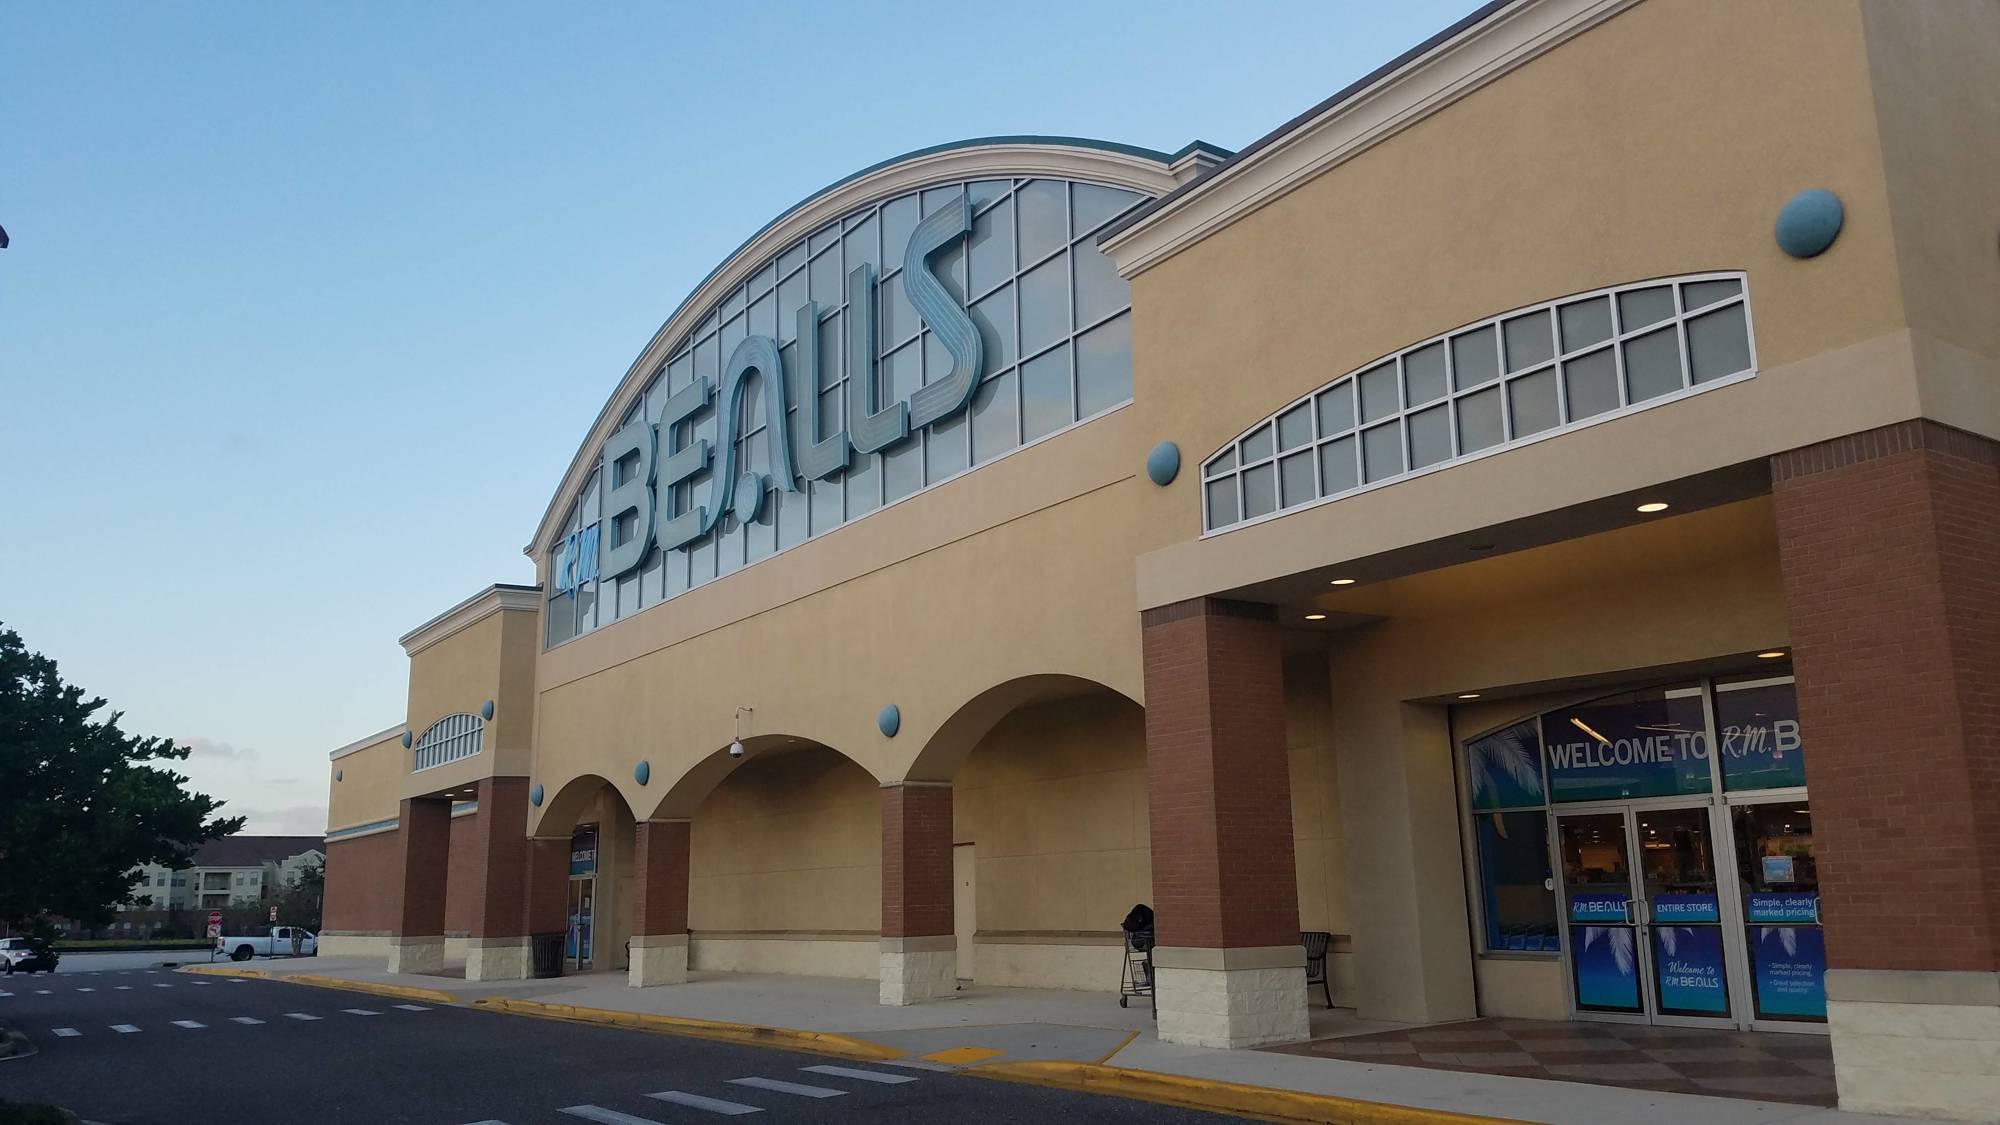 R.M. Bealls stores do not offer email or direct mail savings or coupons and do not accept Bealls Bucks.